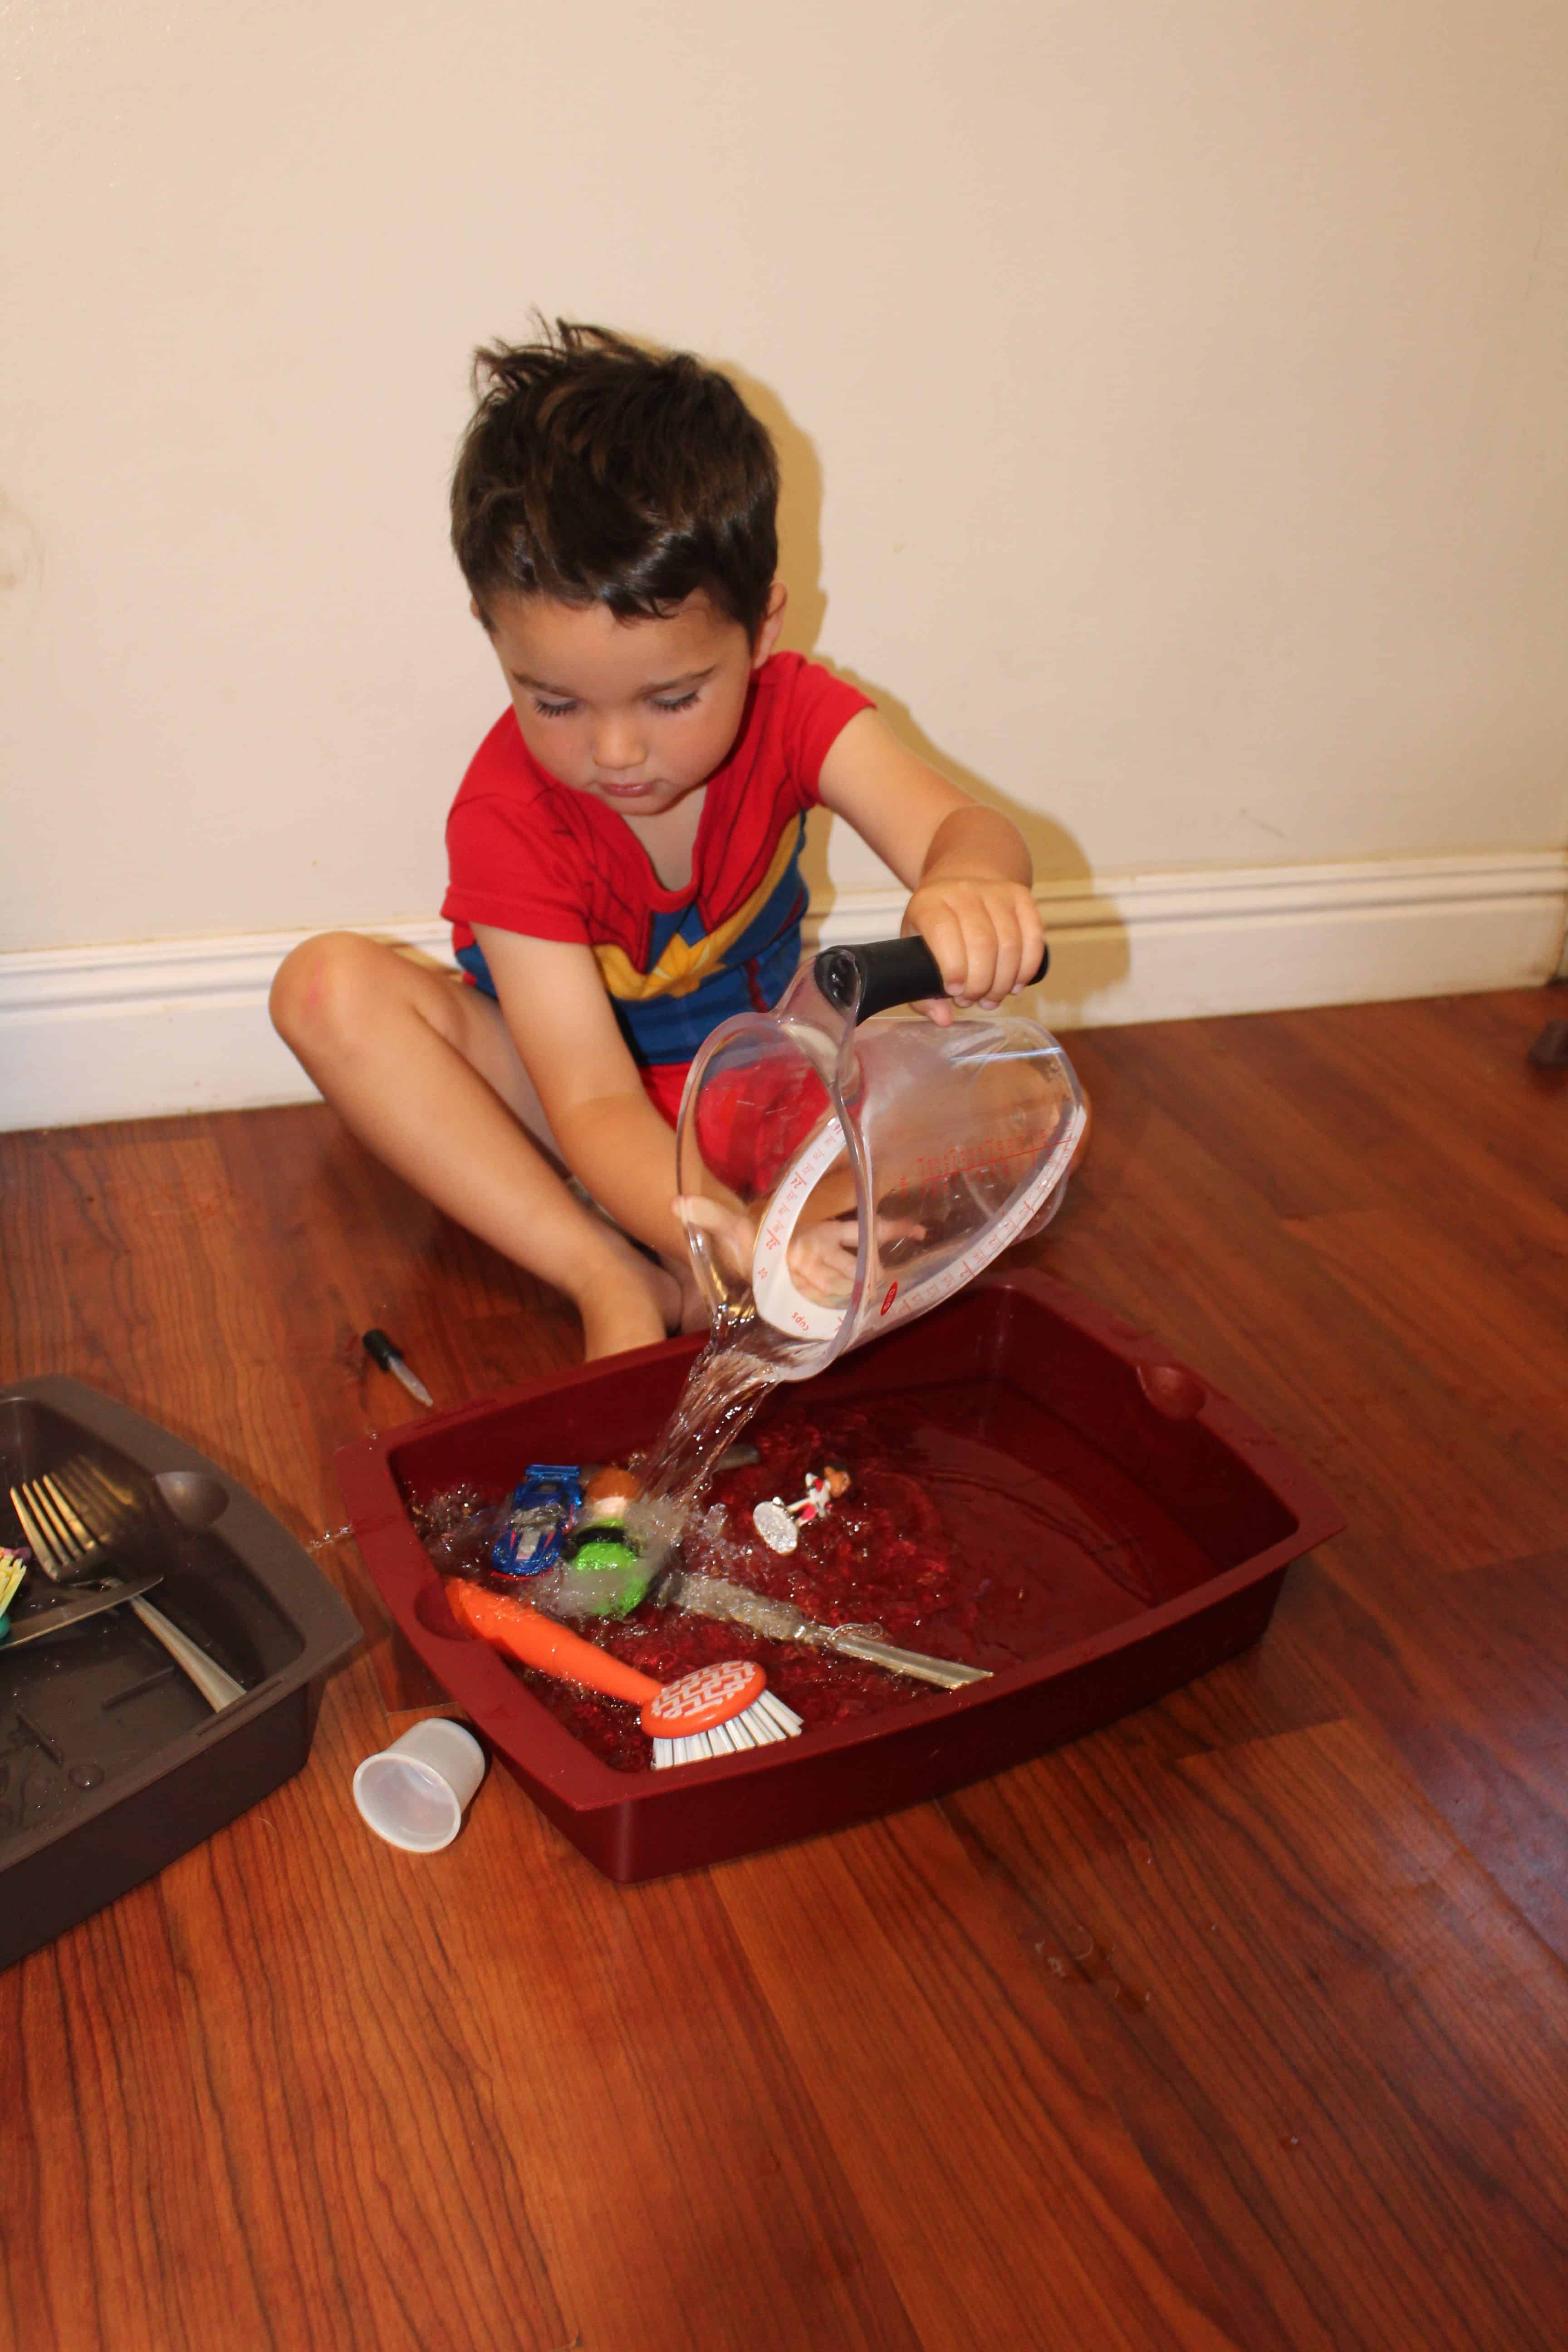 Toddler pouring water from a measuring cup into a baking tray